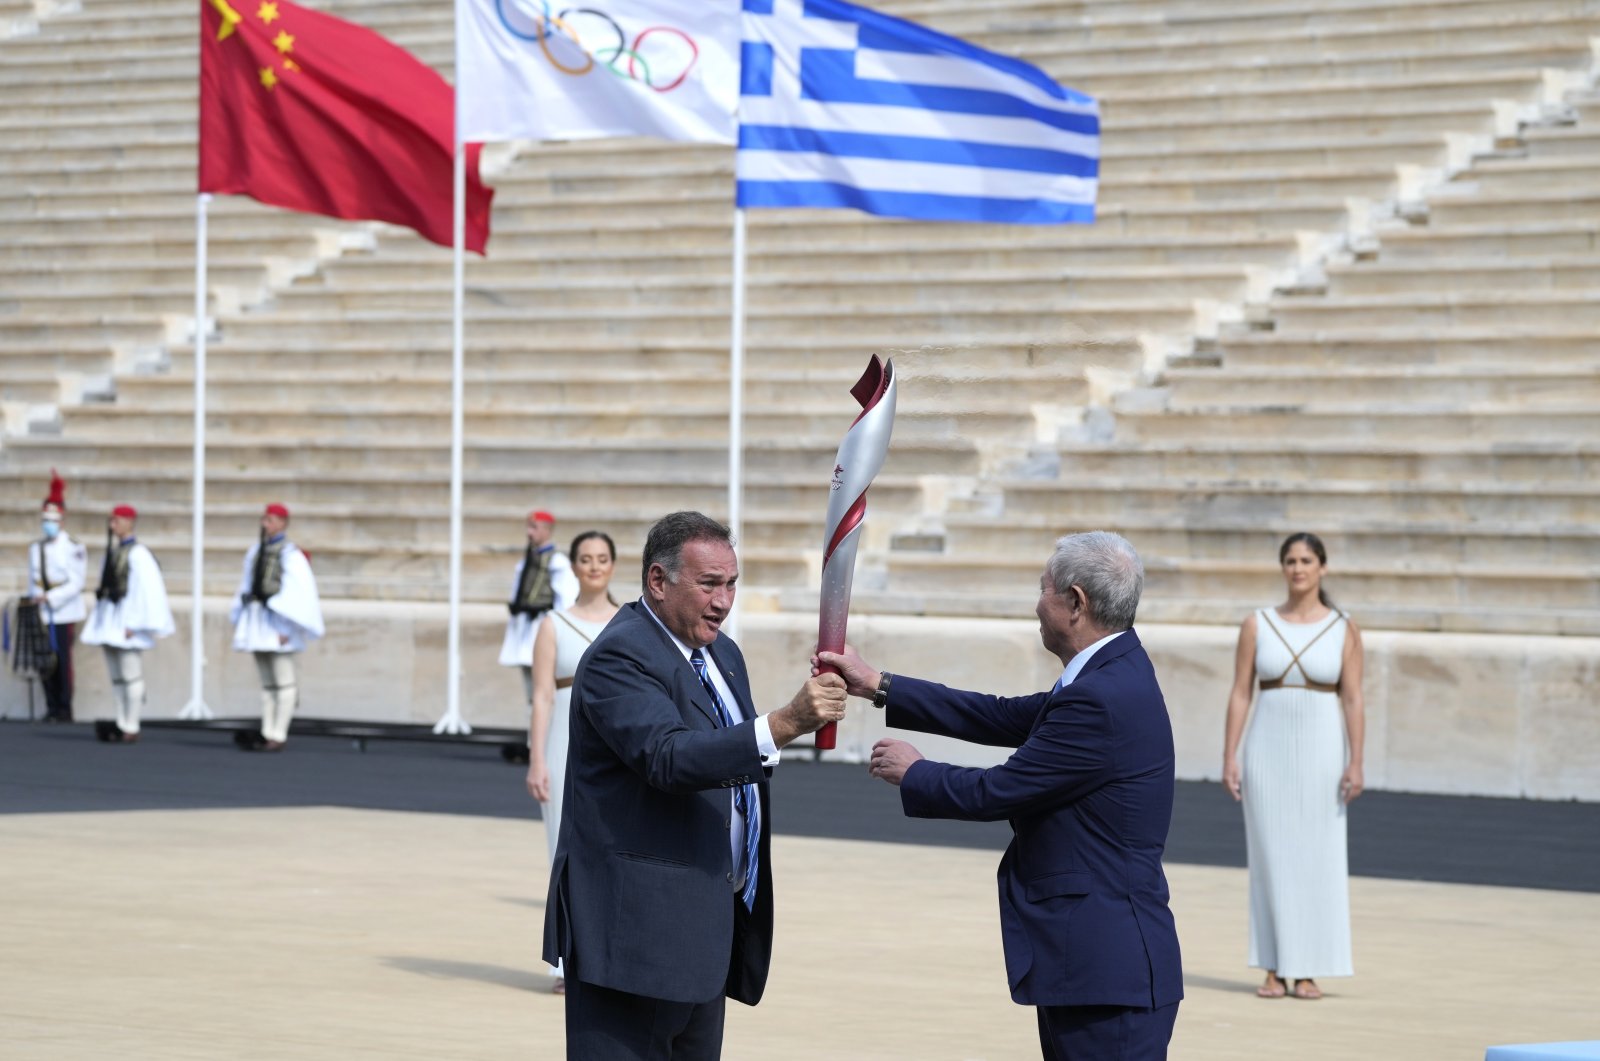 The Greek Olympic Committee chief Spyros Kapralos (L) hands over the Olympic flame to the Chinese Olympic Committee's Yu Zaiqing at Panathinean stadium in Athens, Greece, Oct. 19, 2021. (Reuters Photo)